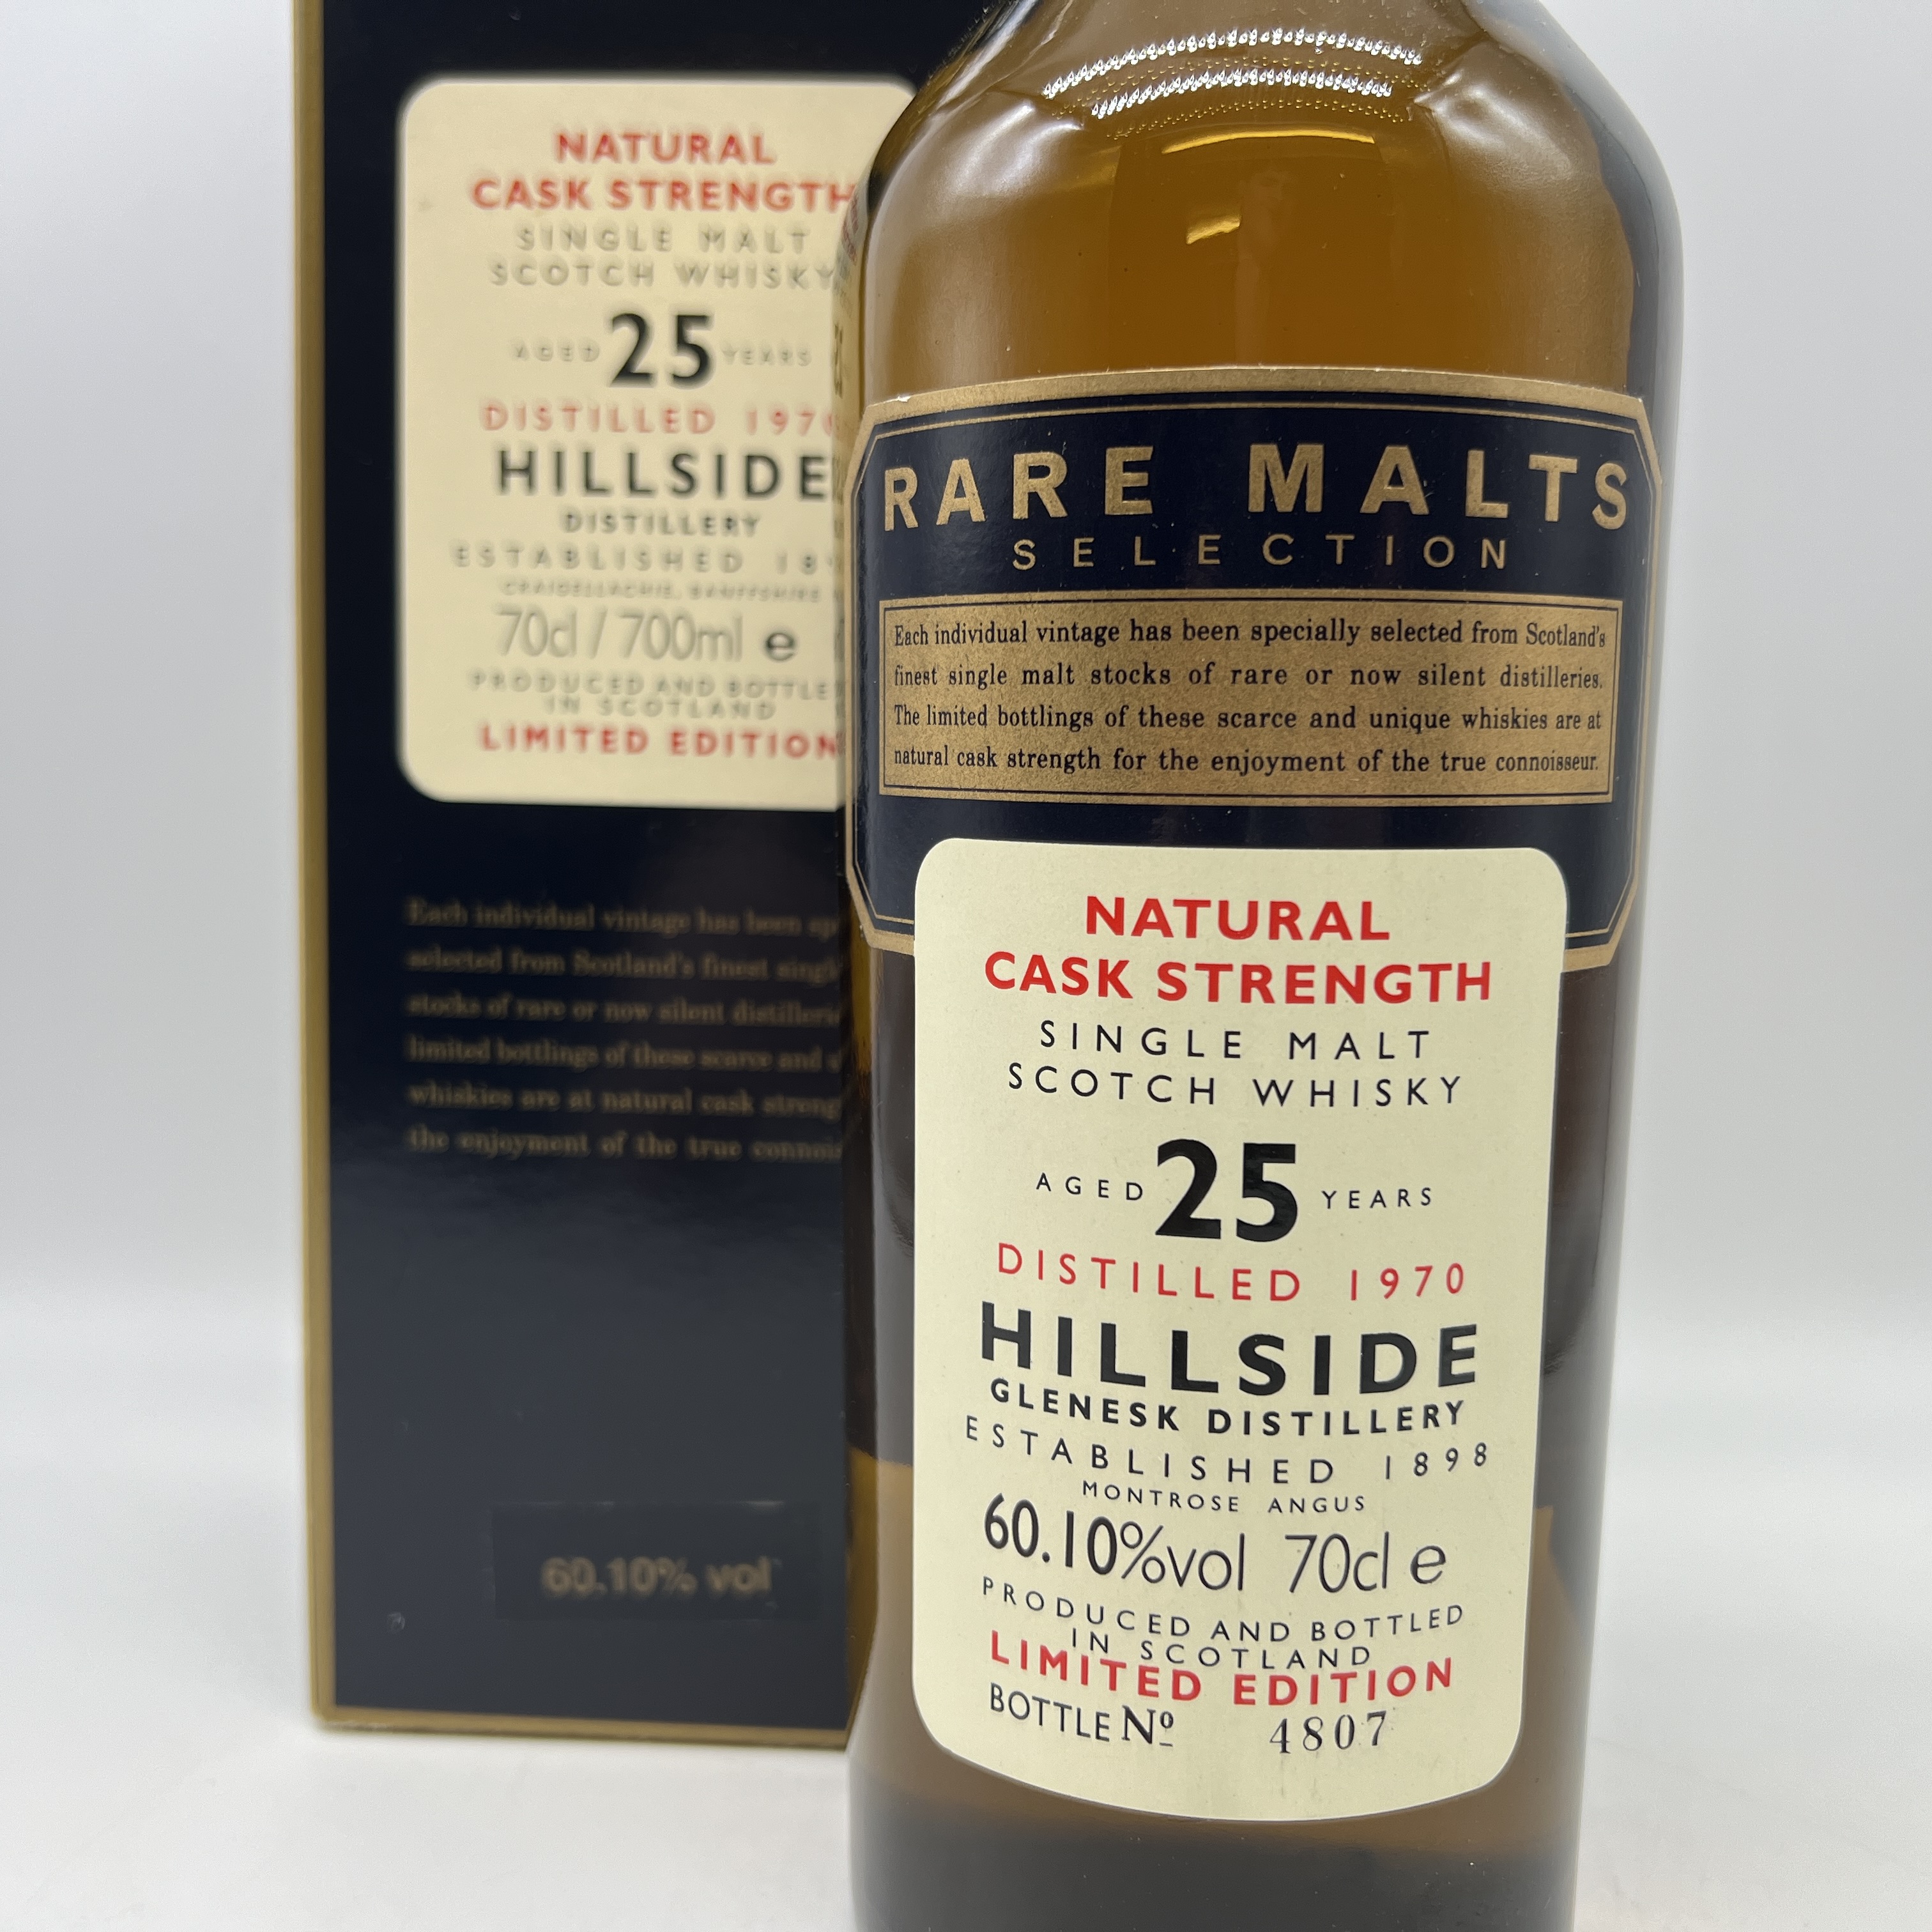 A bottle Rare malts selection Hillside 25 year old whisky - Image 2 of 3